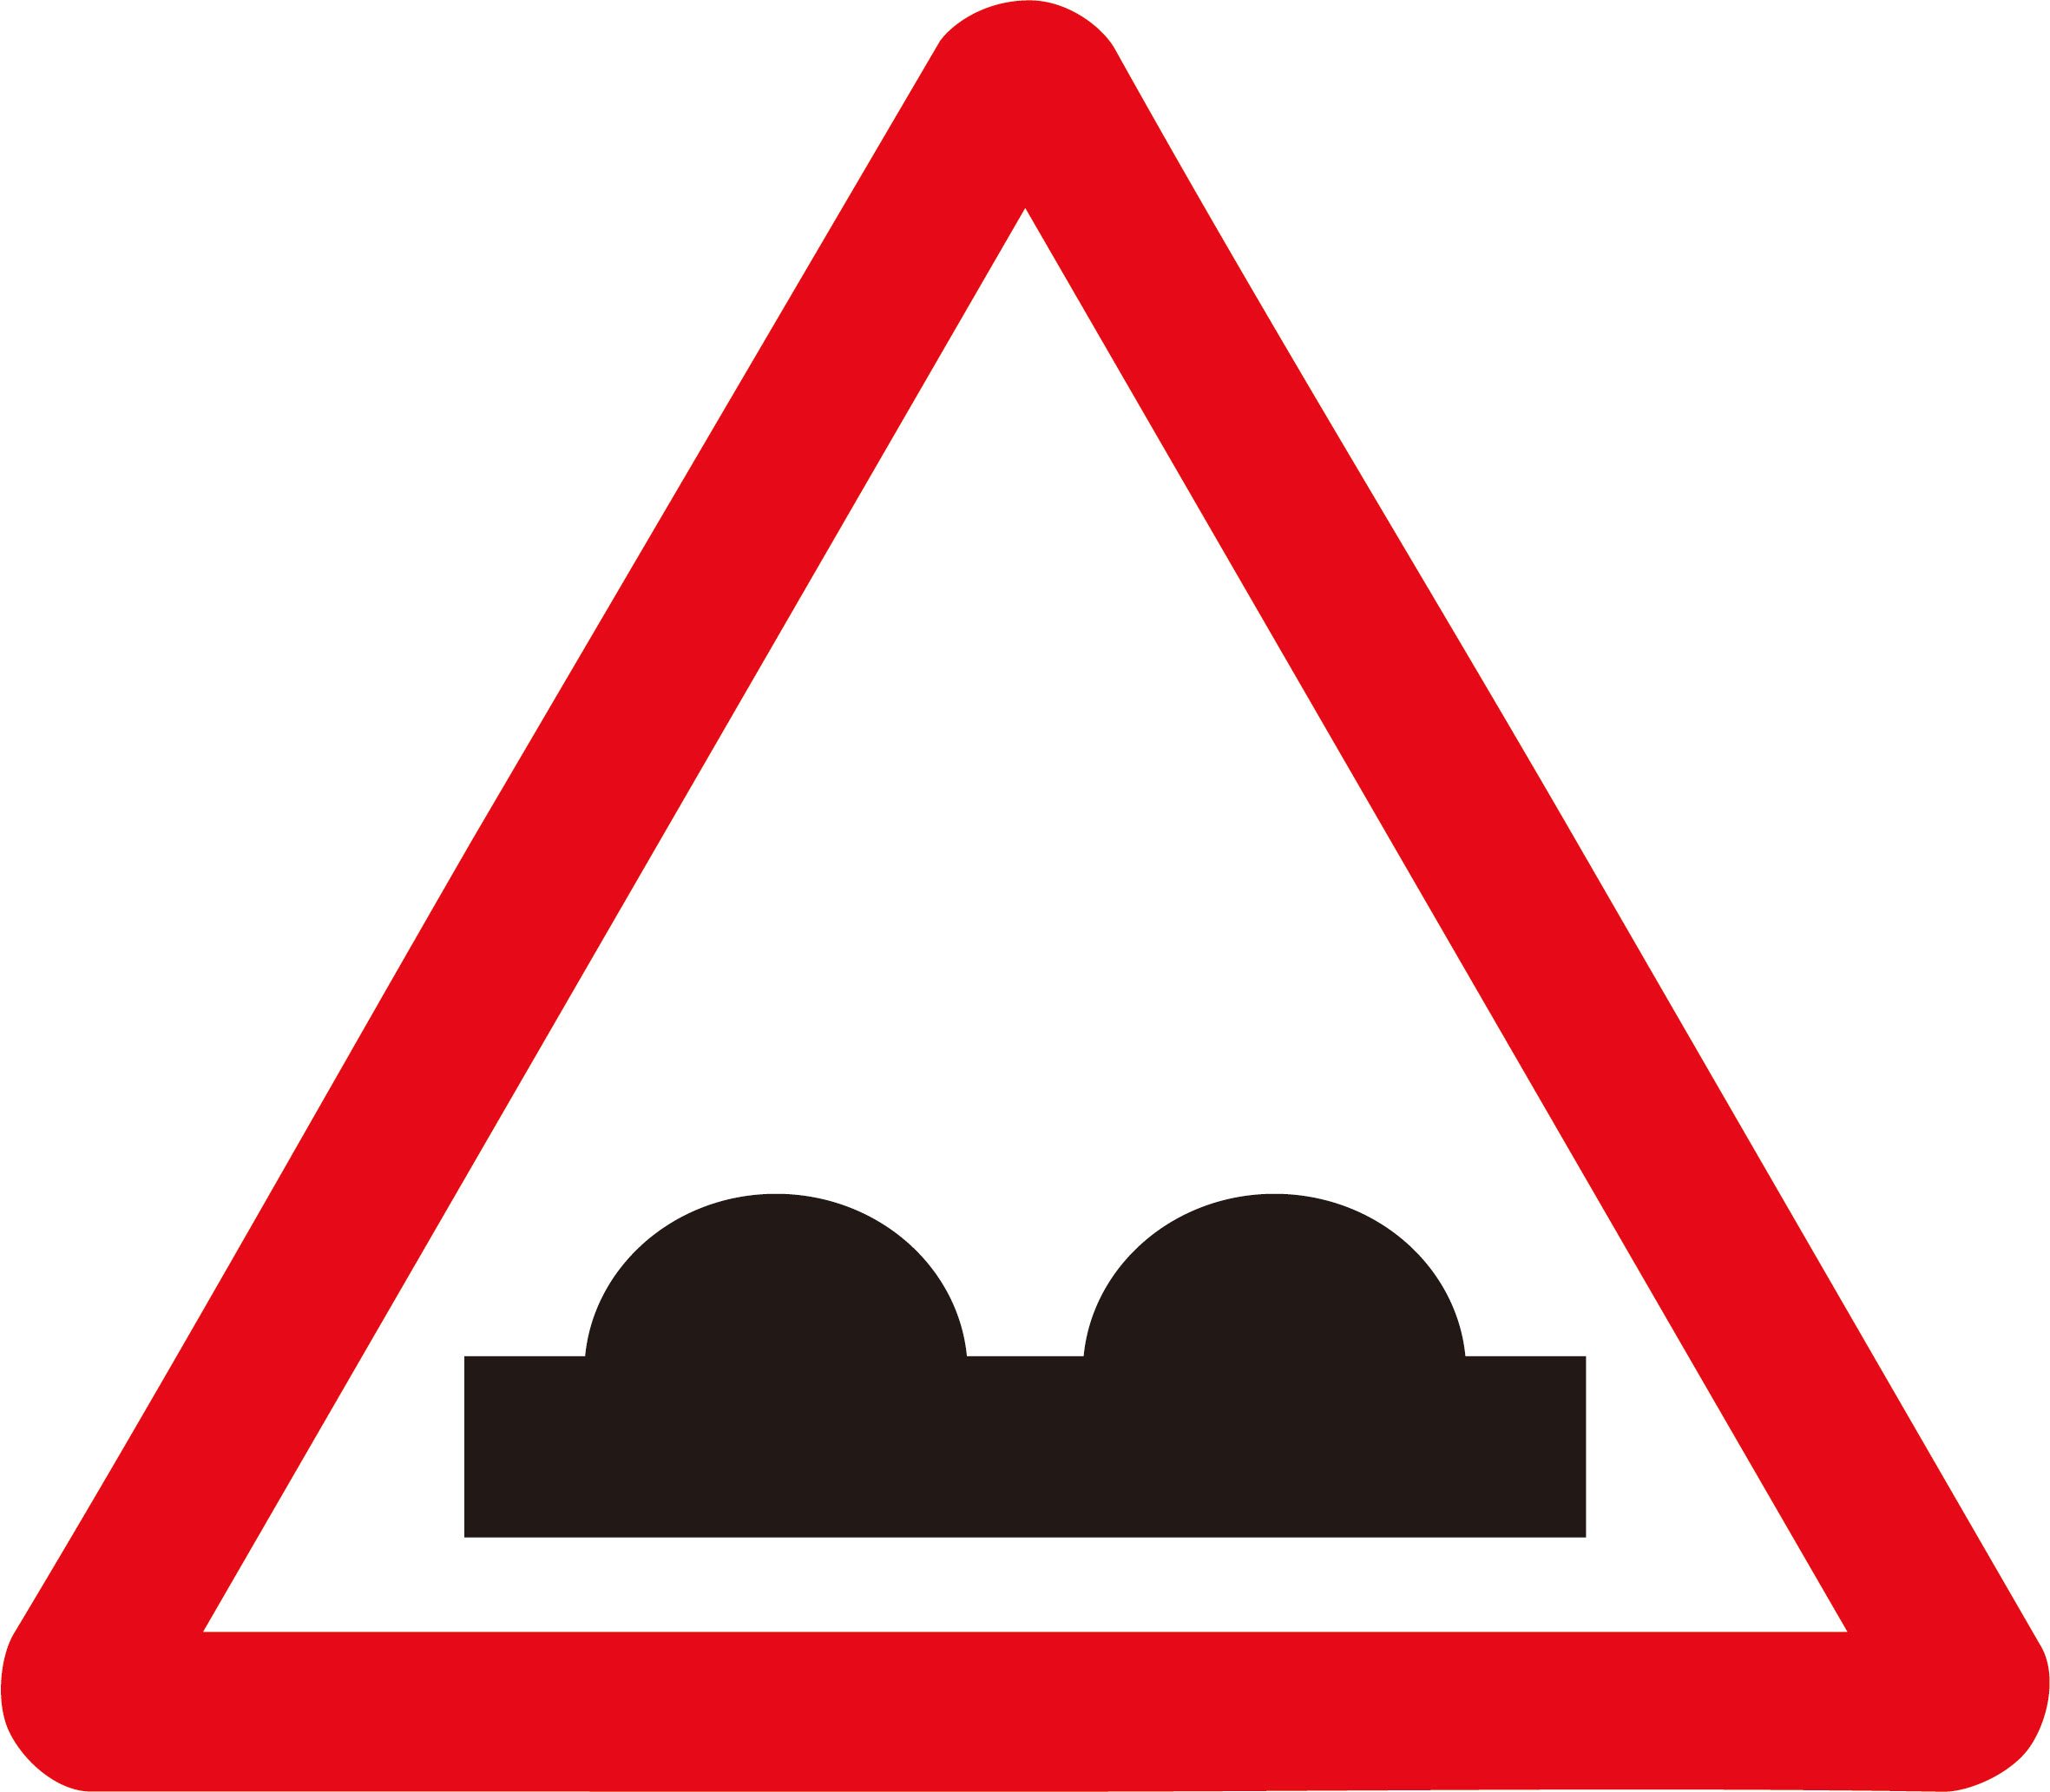 Road Traffic Signs And Symbols 2 | IMAGEIF